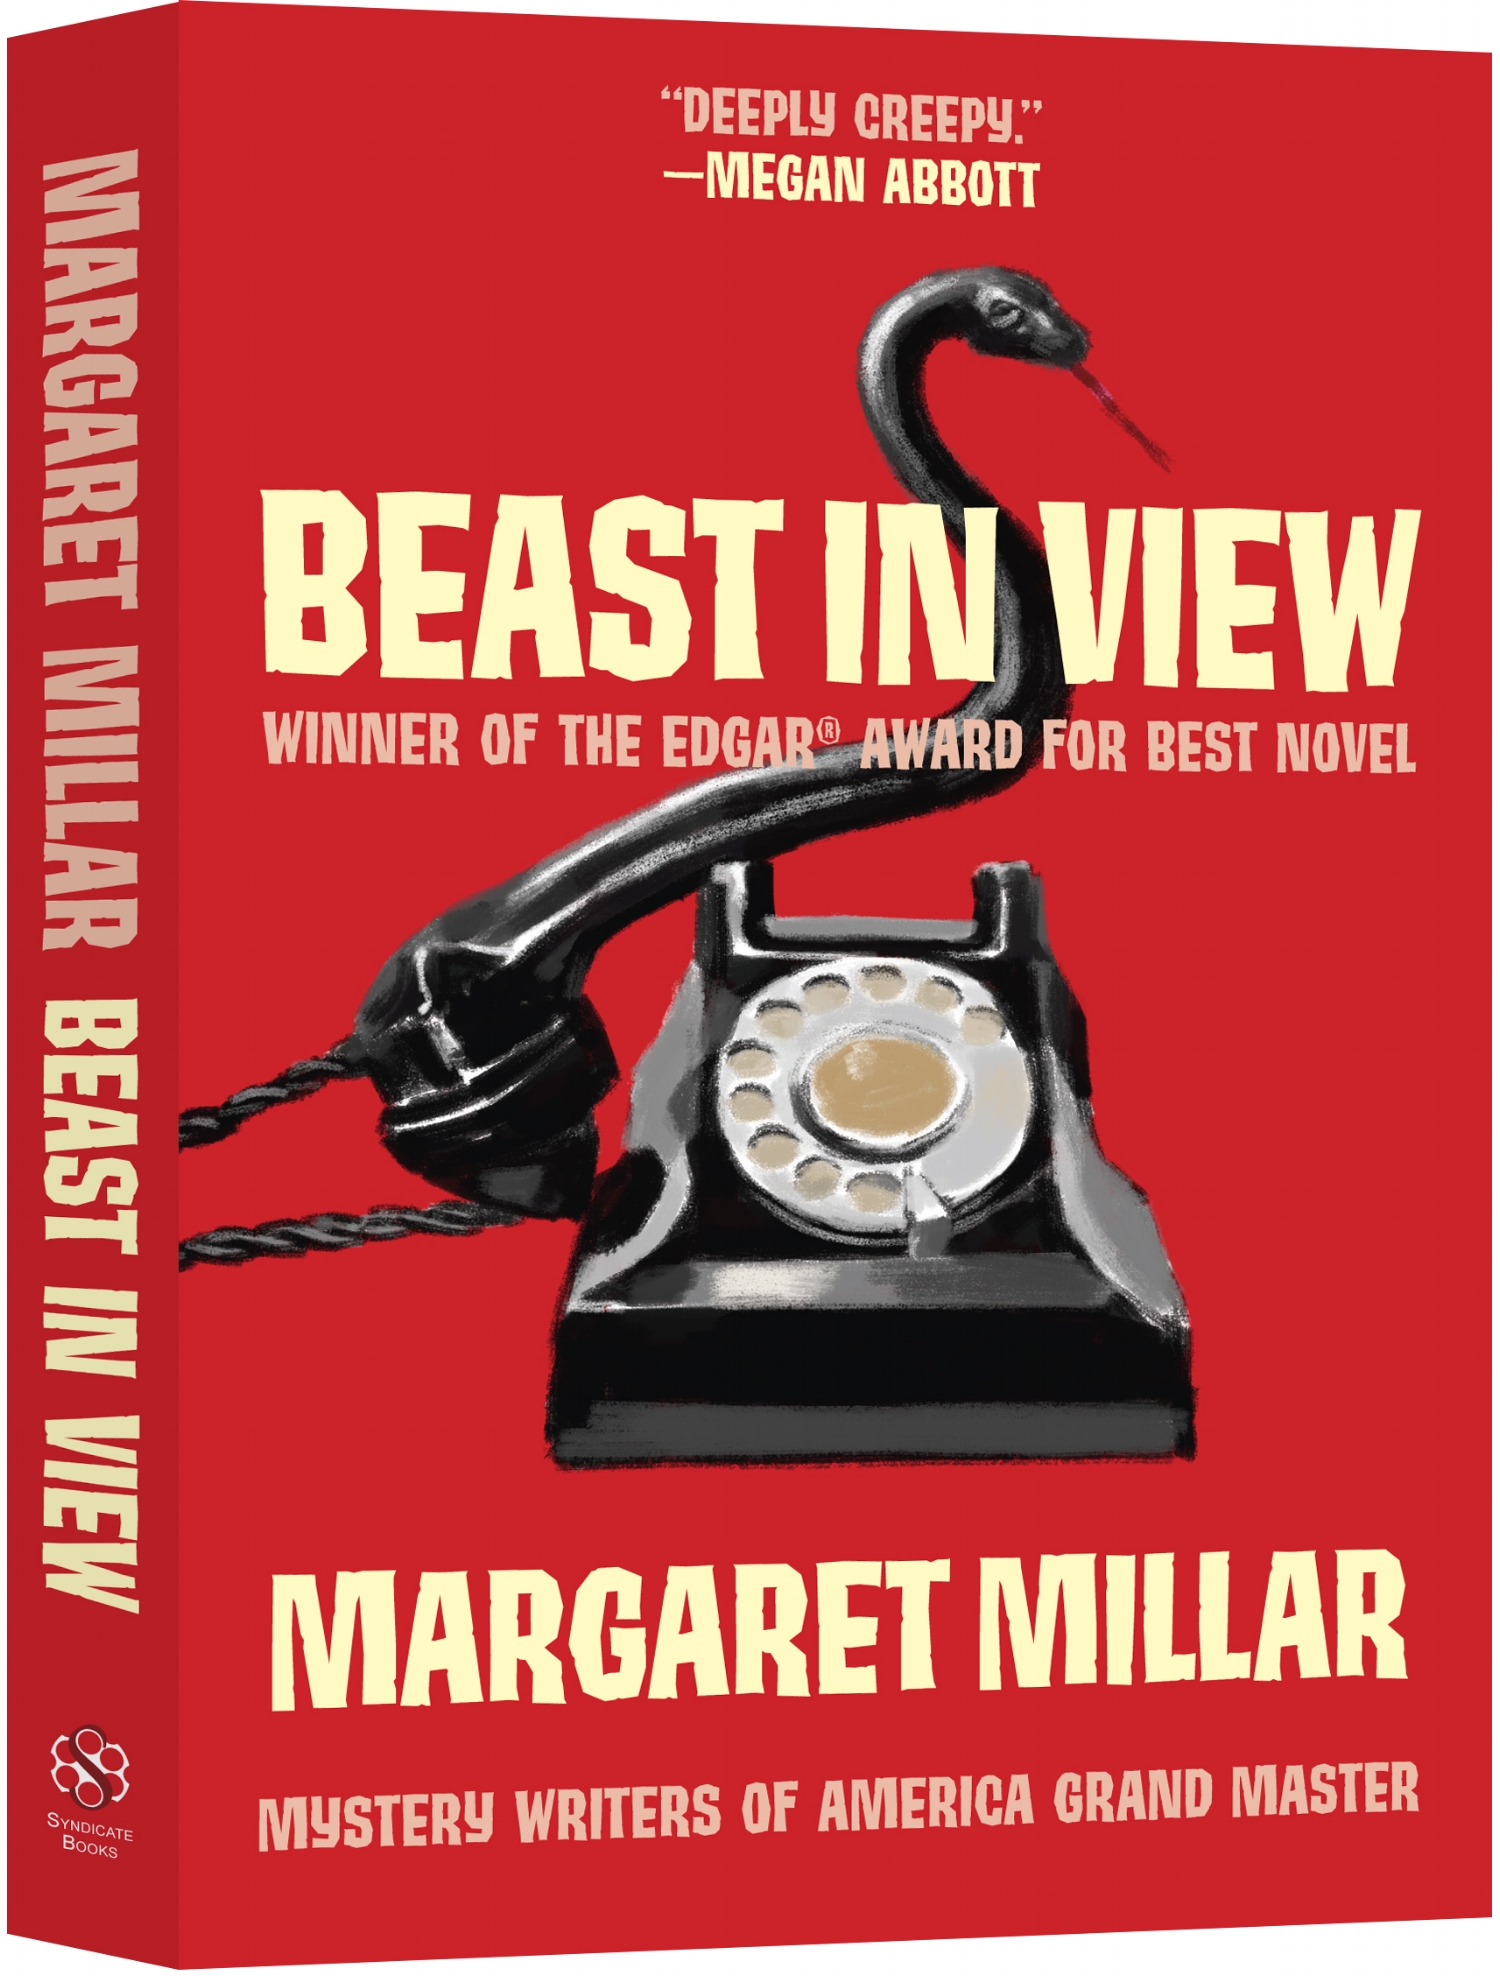 BEAST IN VIEW (Trade Paperback)